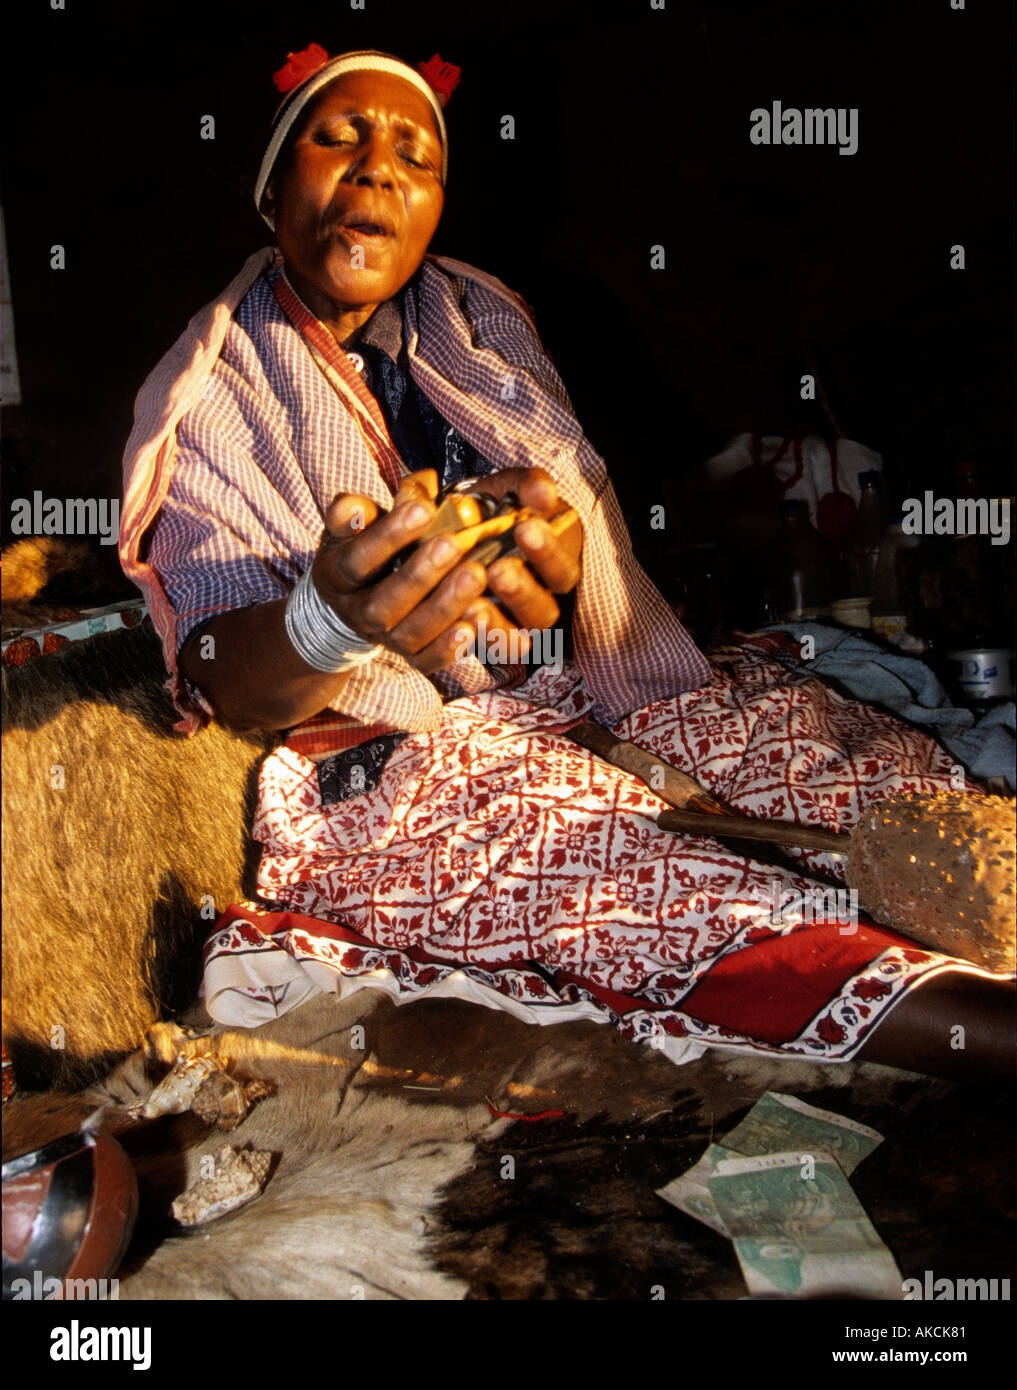 A Sangoma witch doctor in South Africa Stock Photo